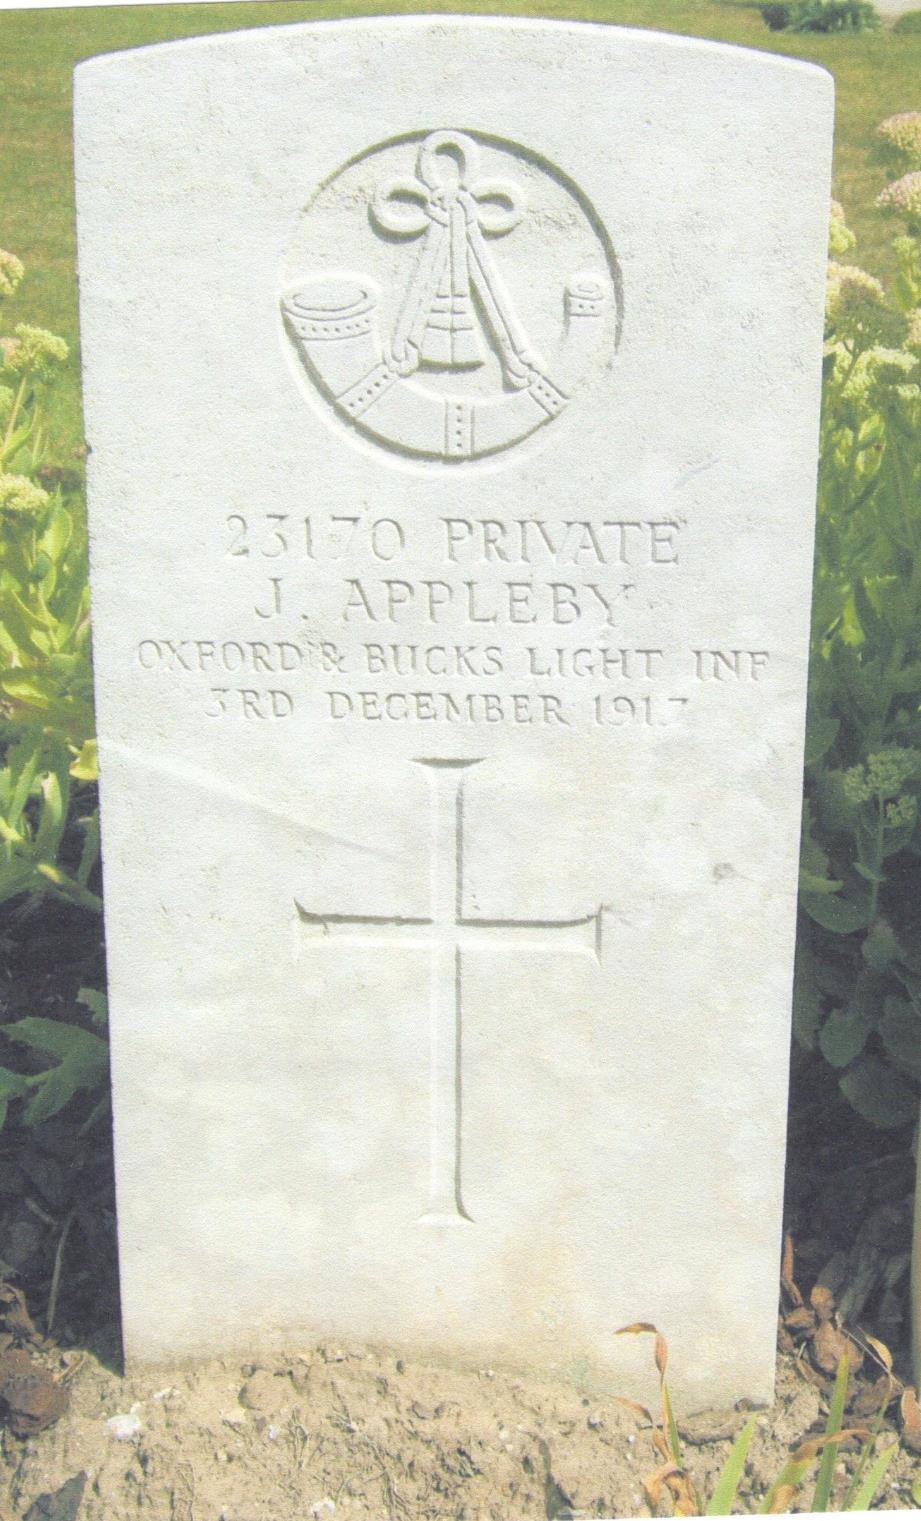 James Appleby 17 th July 1897-3 rd December 1917 Died from his wounds at a